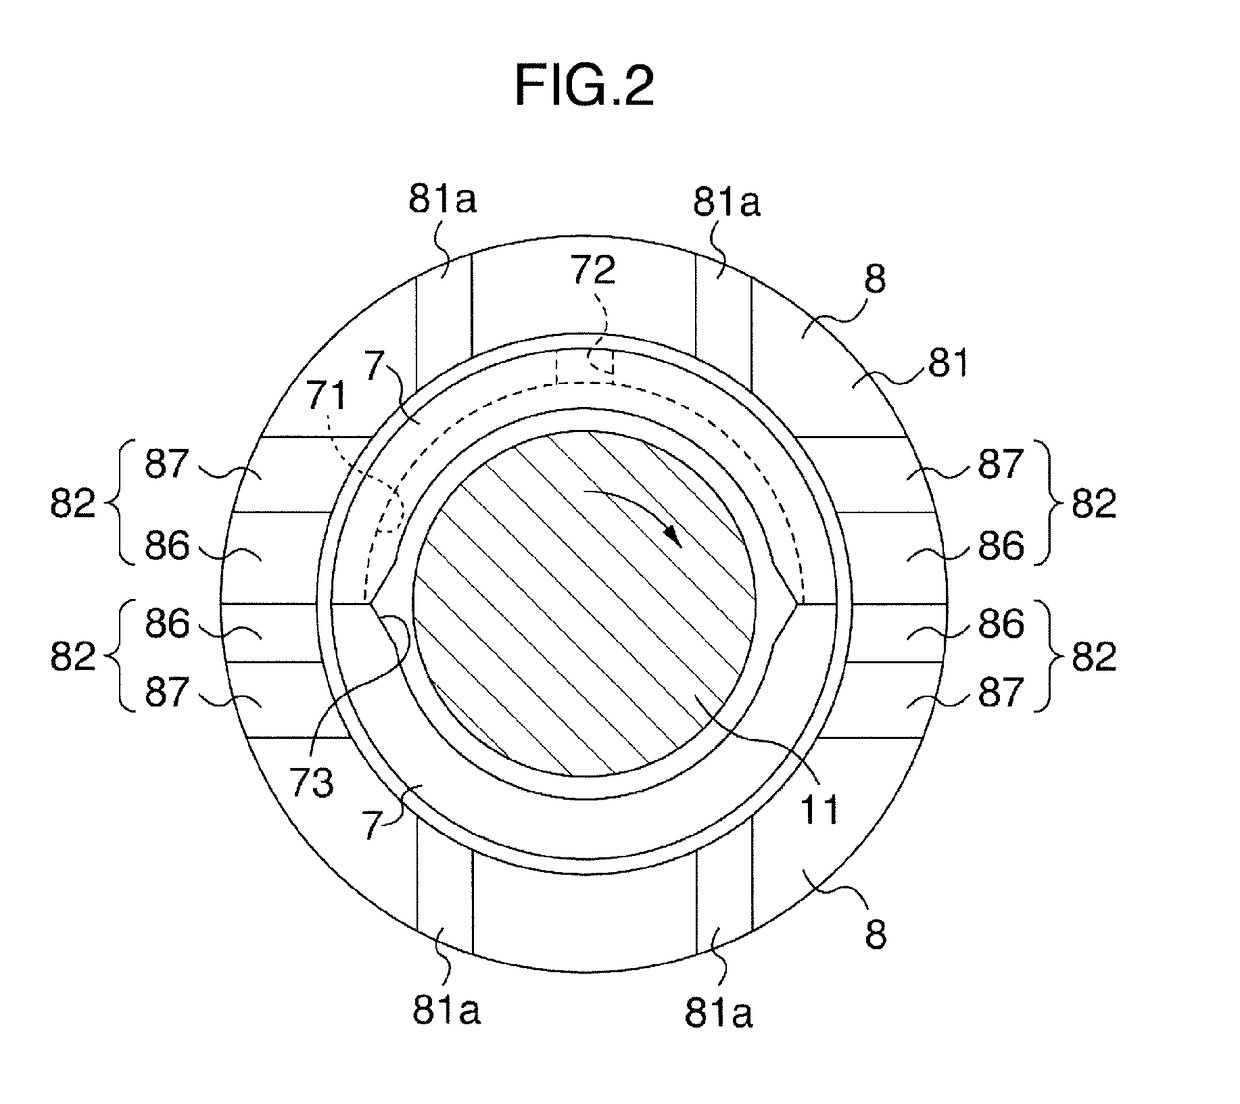 Half thrust bearing and bearing device for crankshaft of internal combustion engine